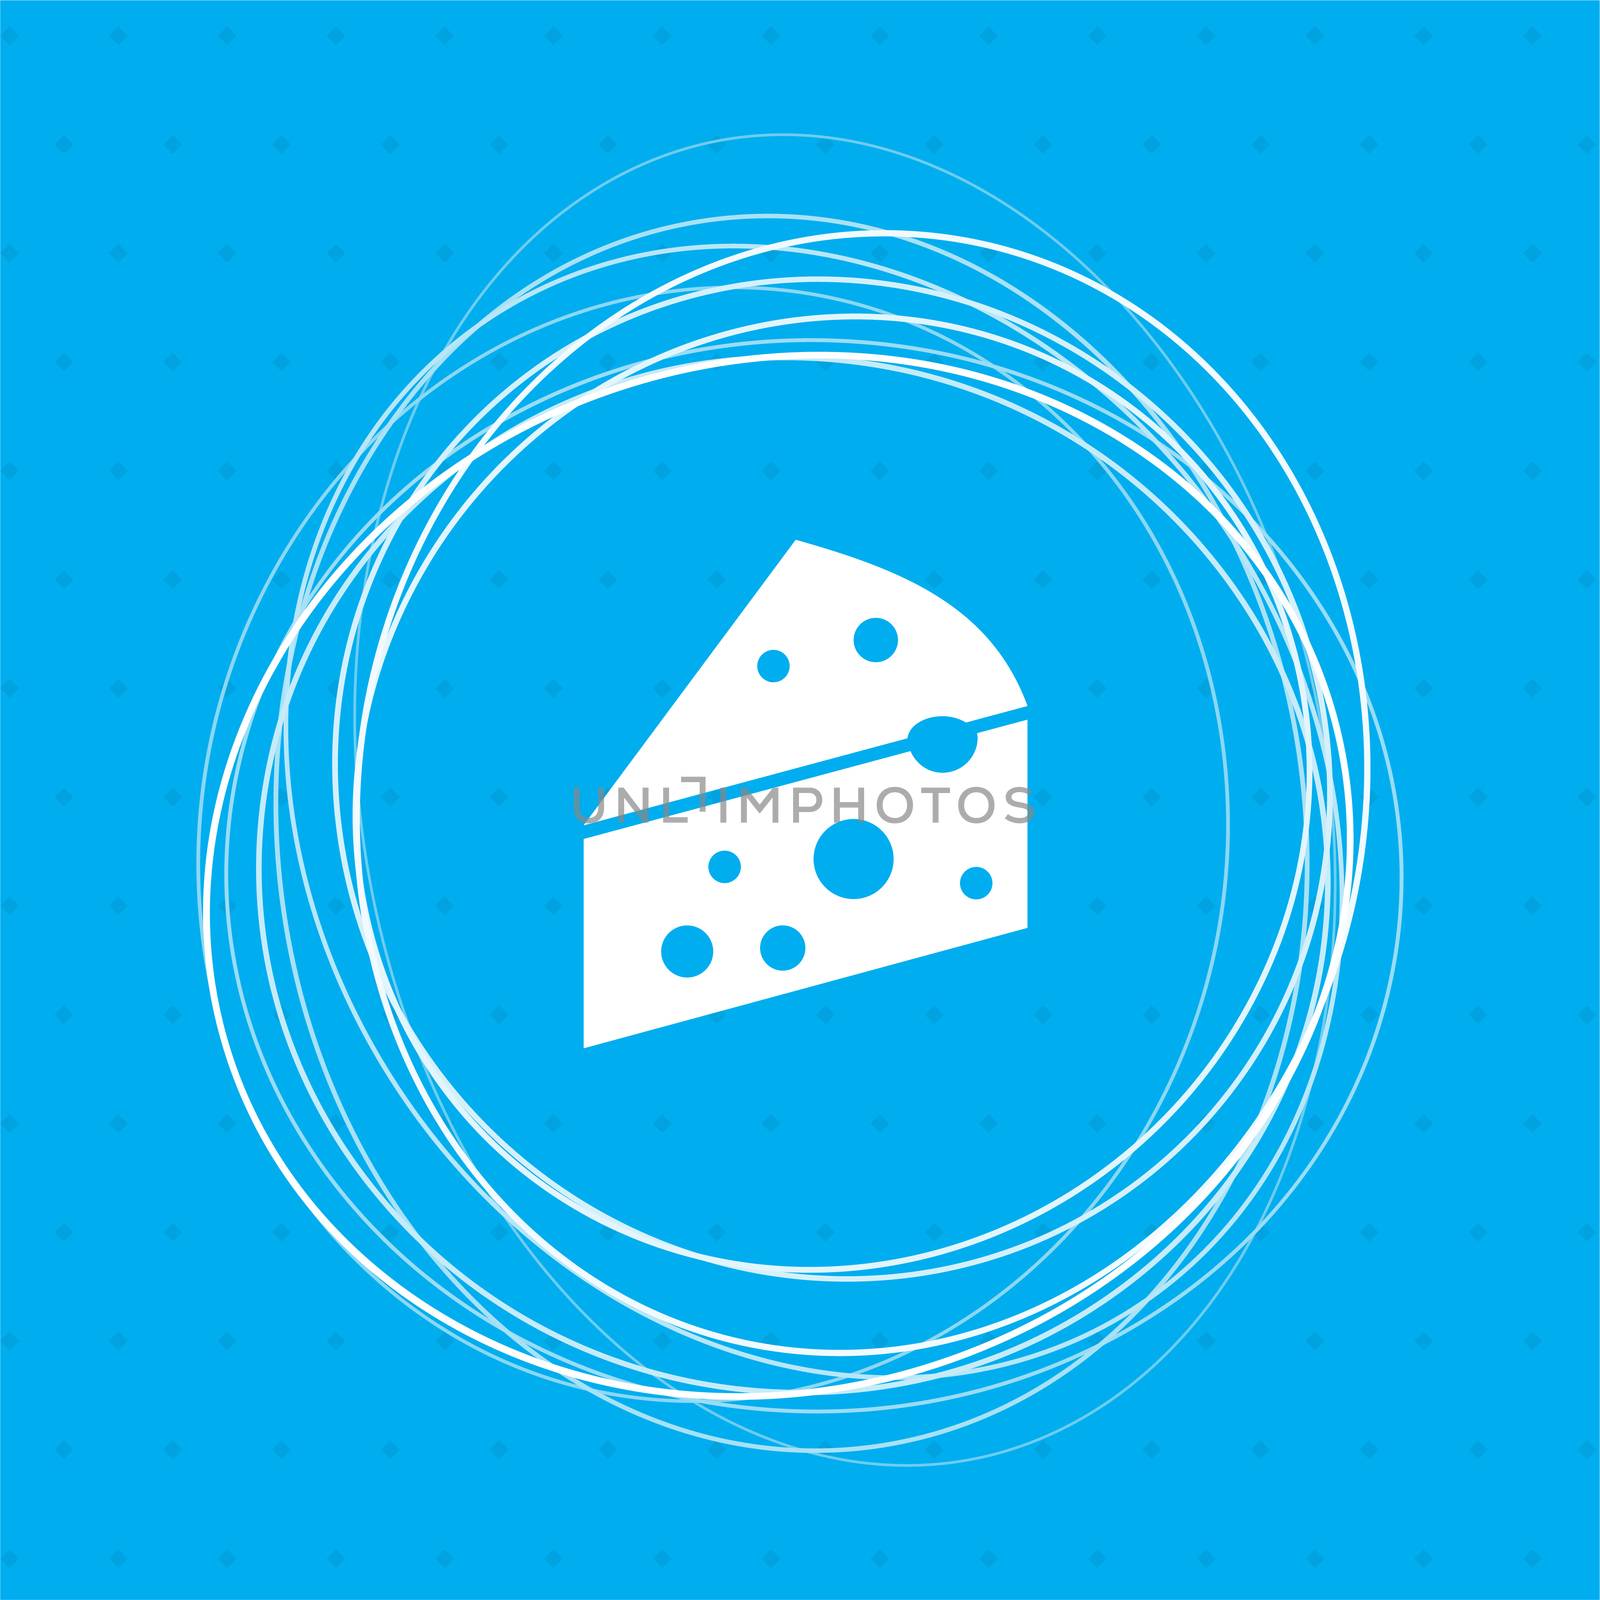 Cheese icon on a blue background with abstract circles around and place for your text.  by Adamchuk